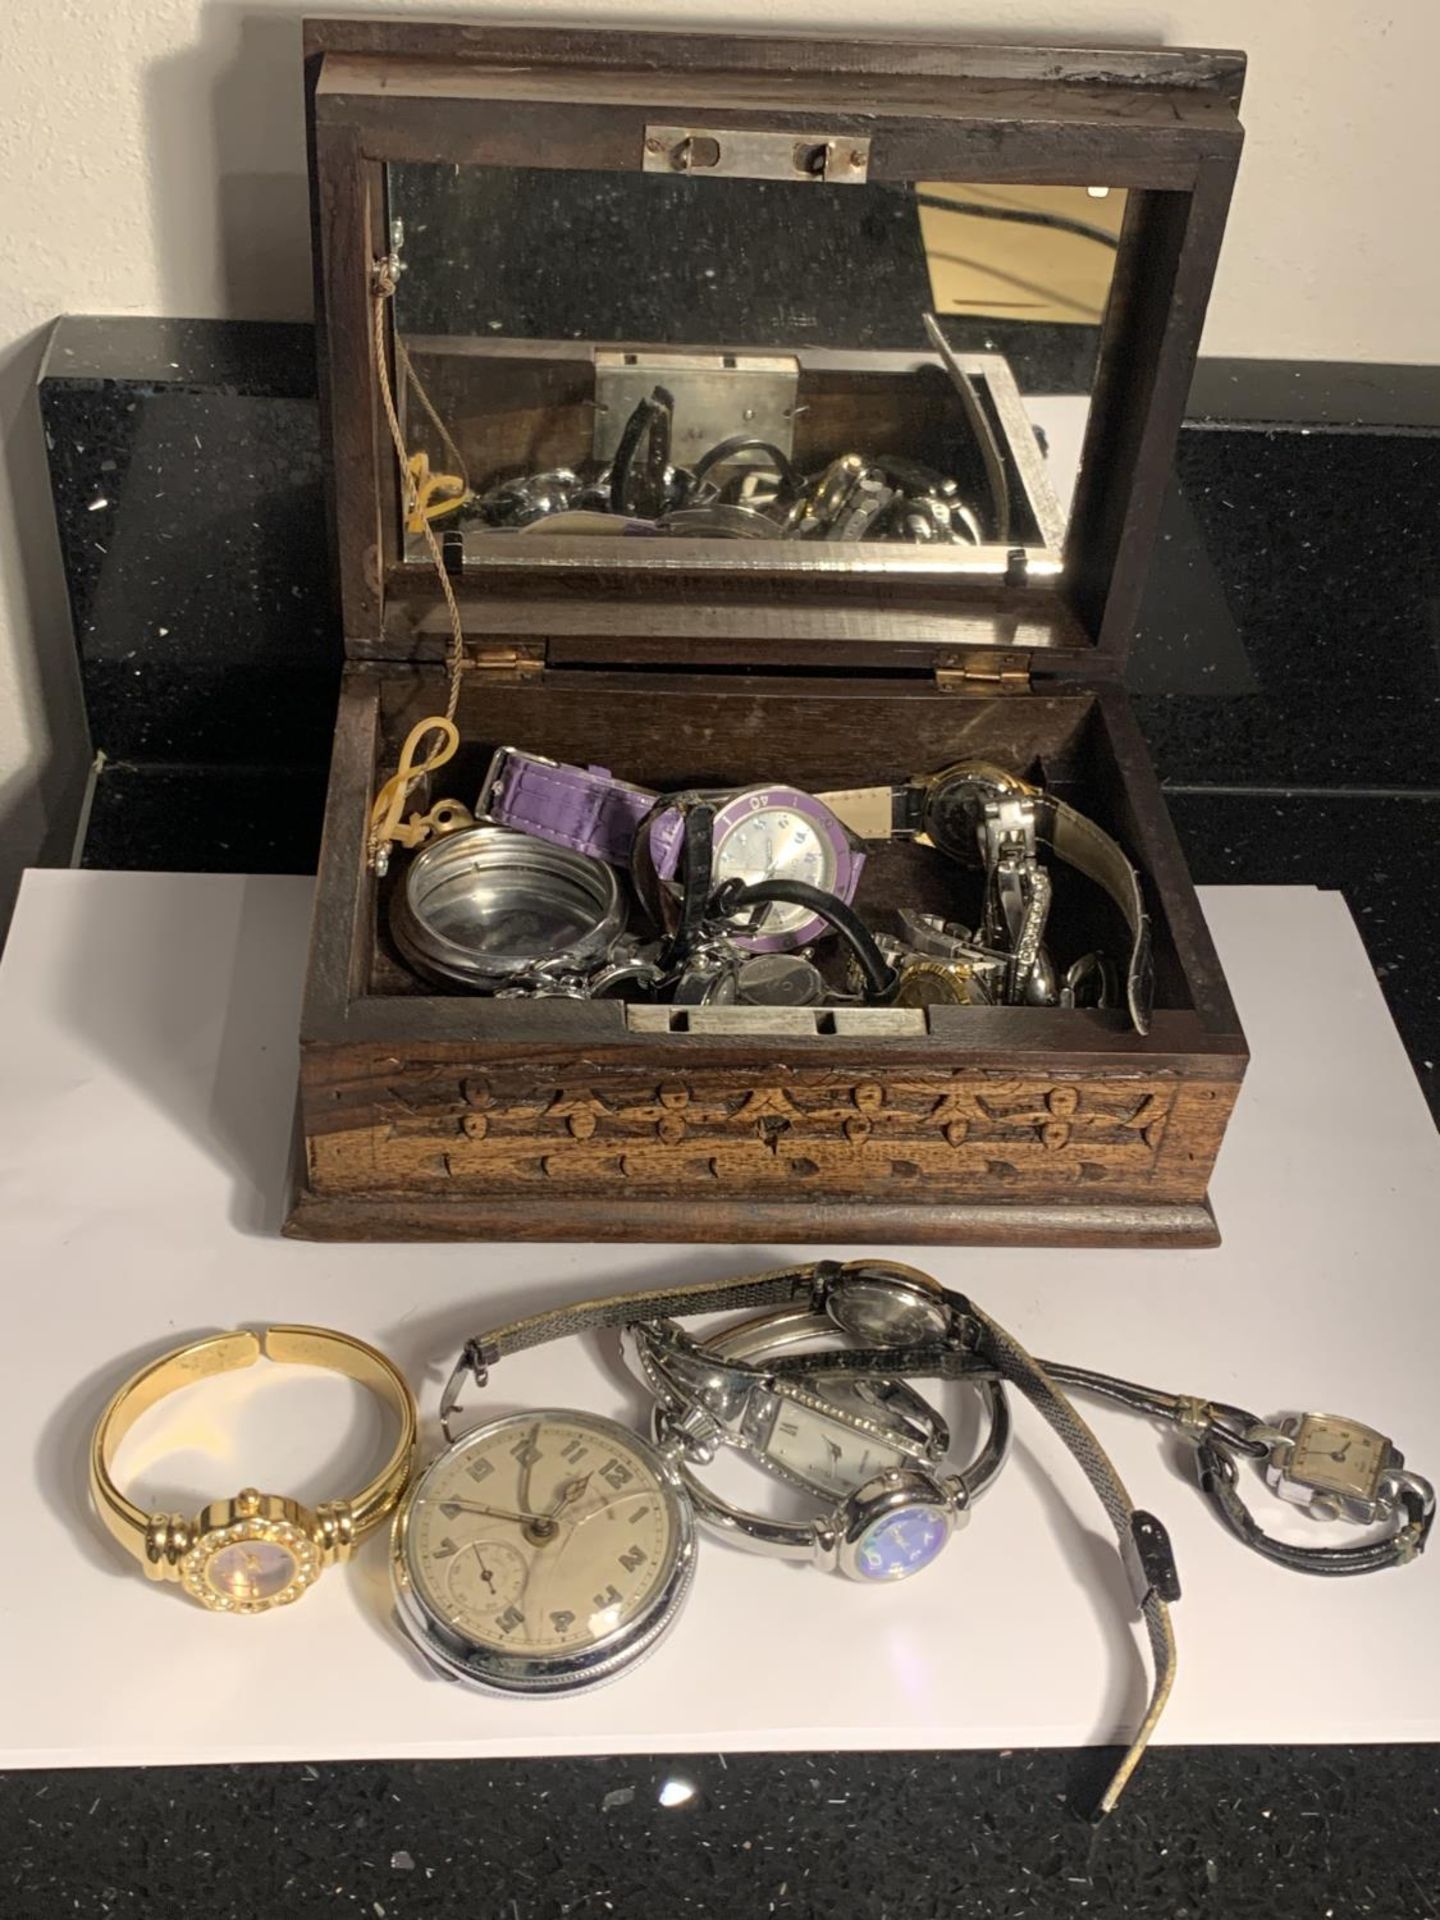 A CARVED WOODEN BOX WITH A QUANTITY OF WATCHES AND PARTS